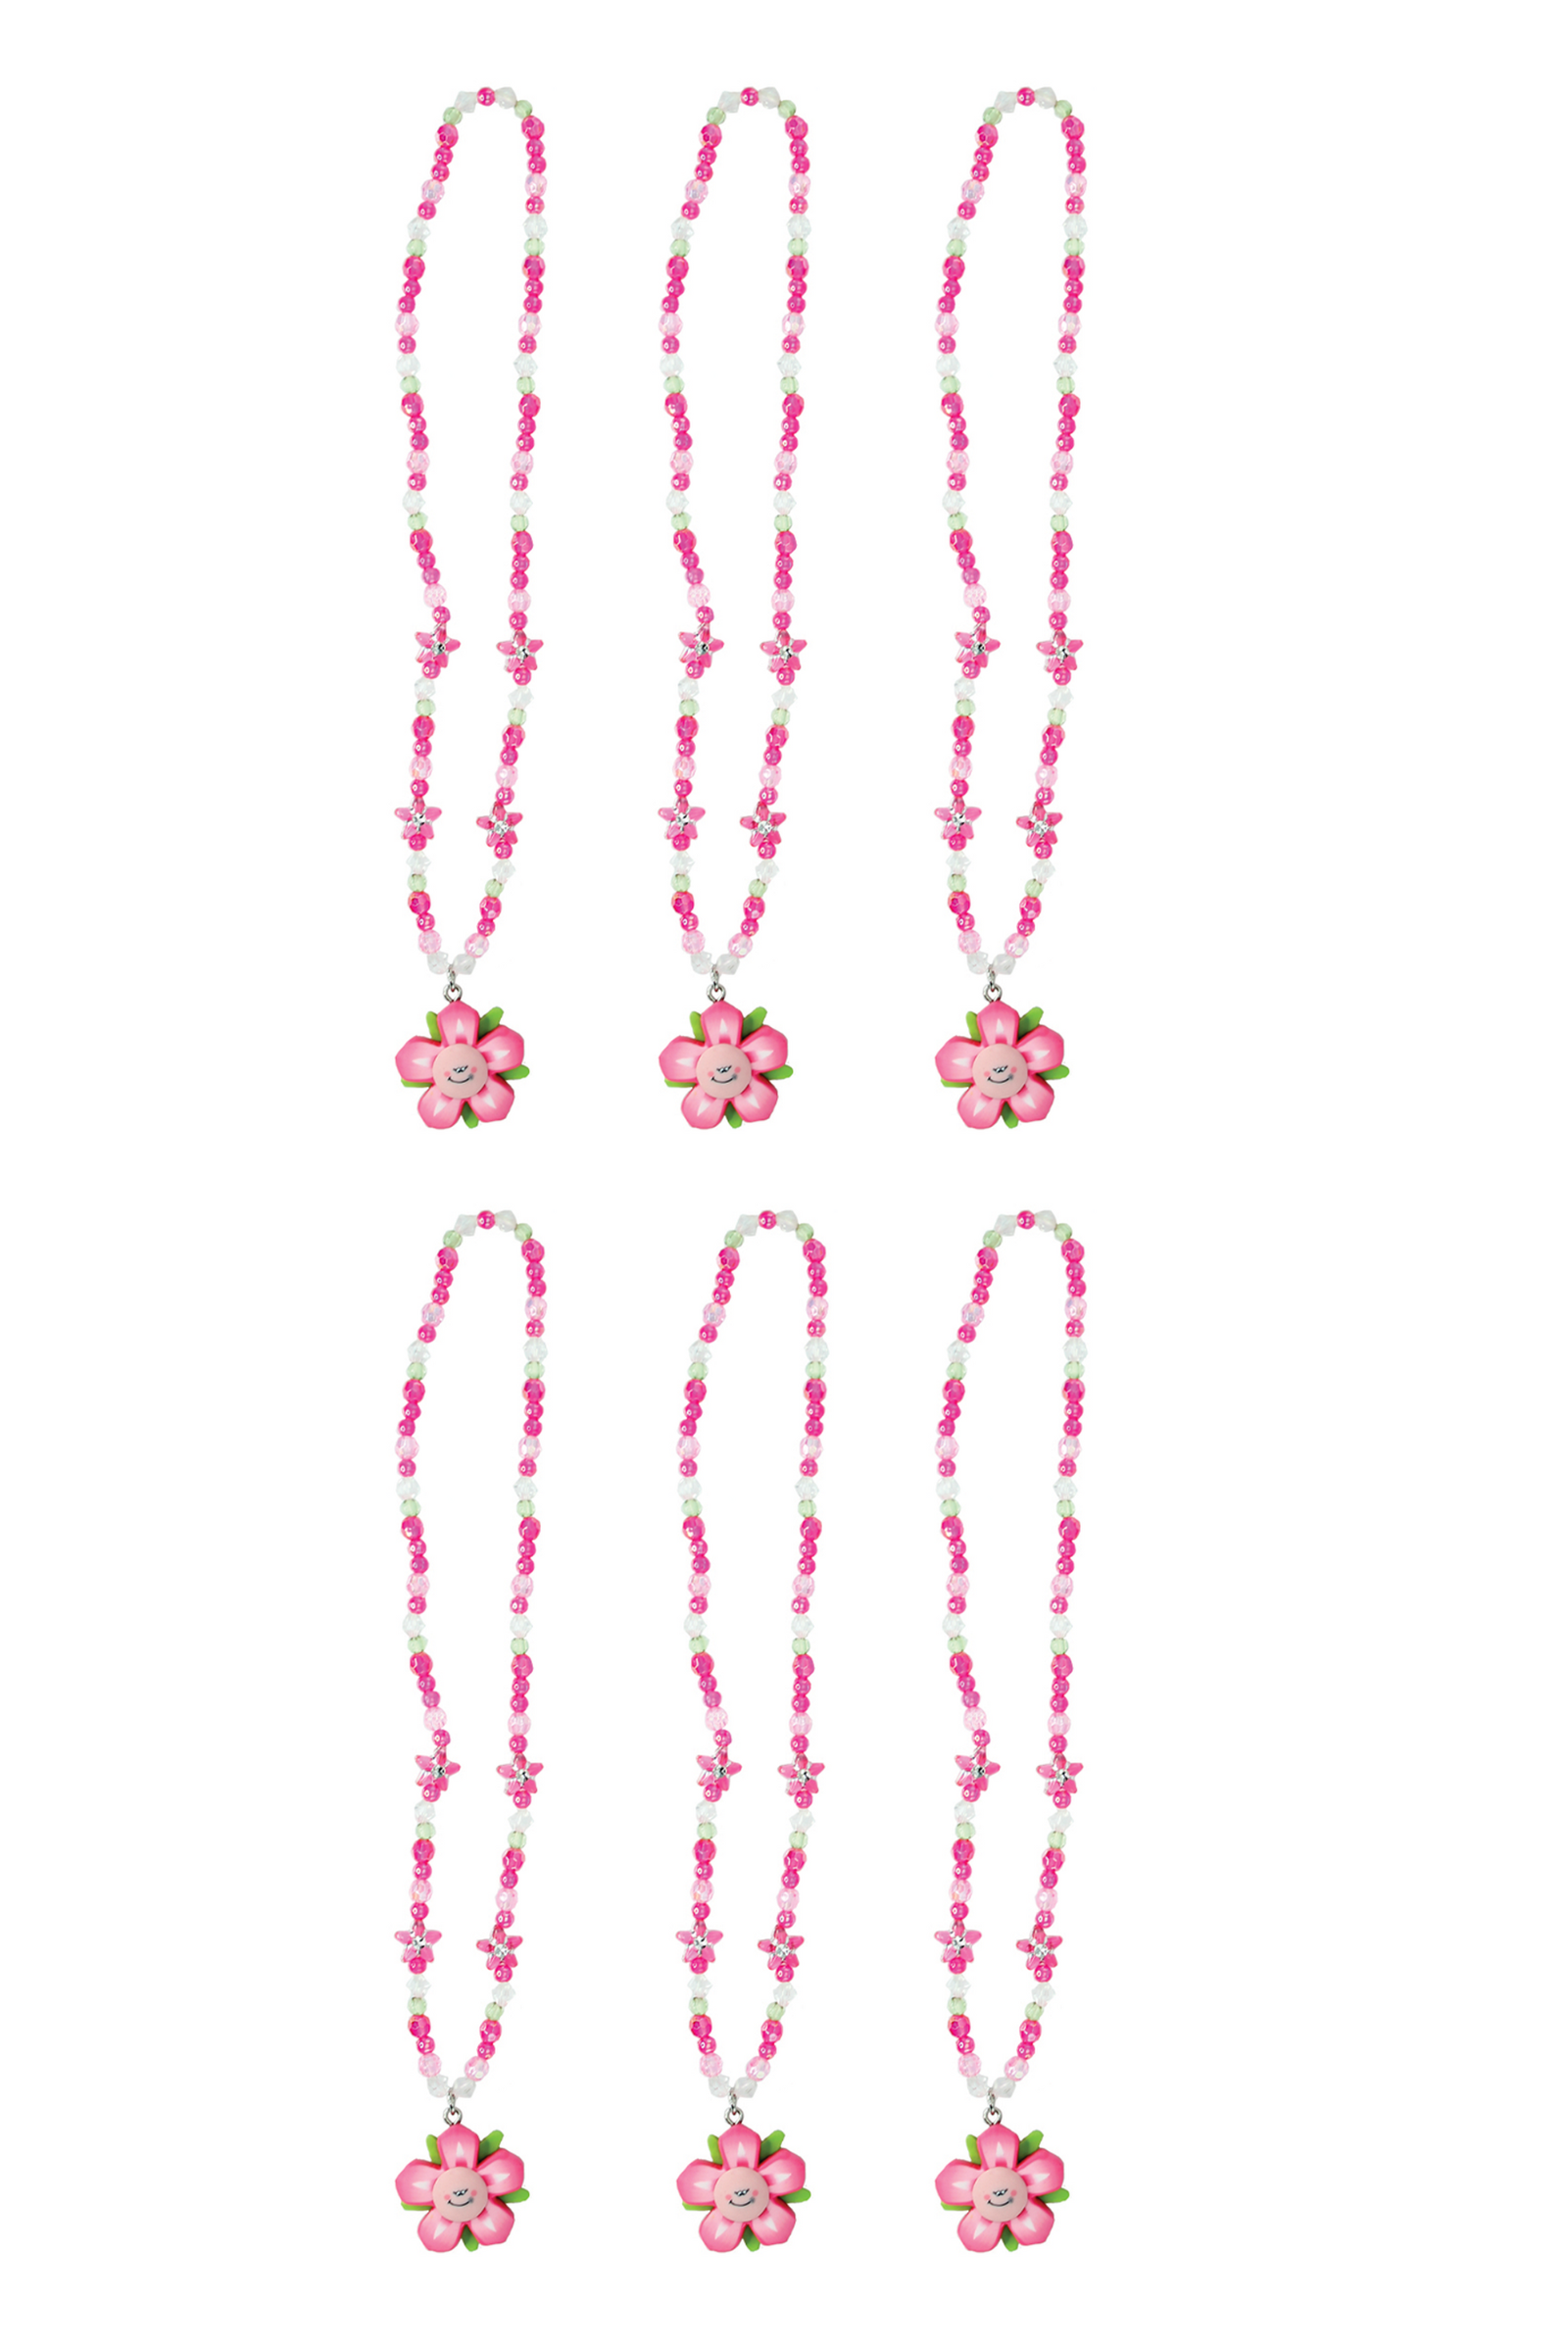 Ring Around the Rosy Necklace Bundle